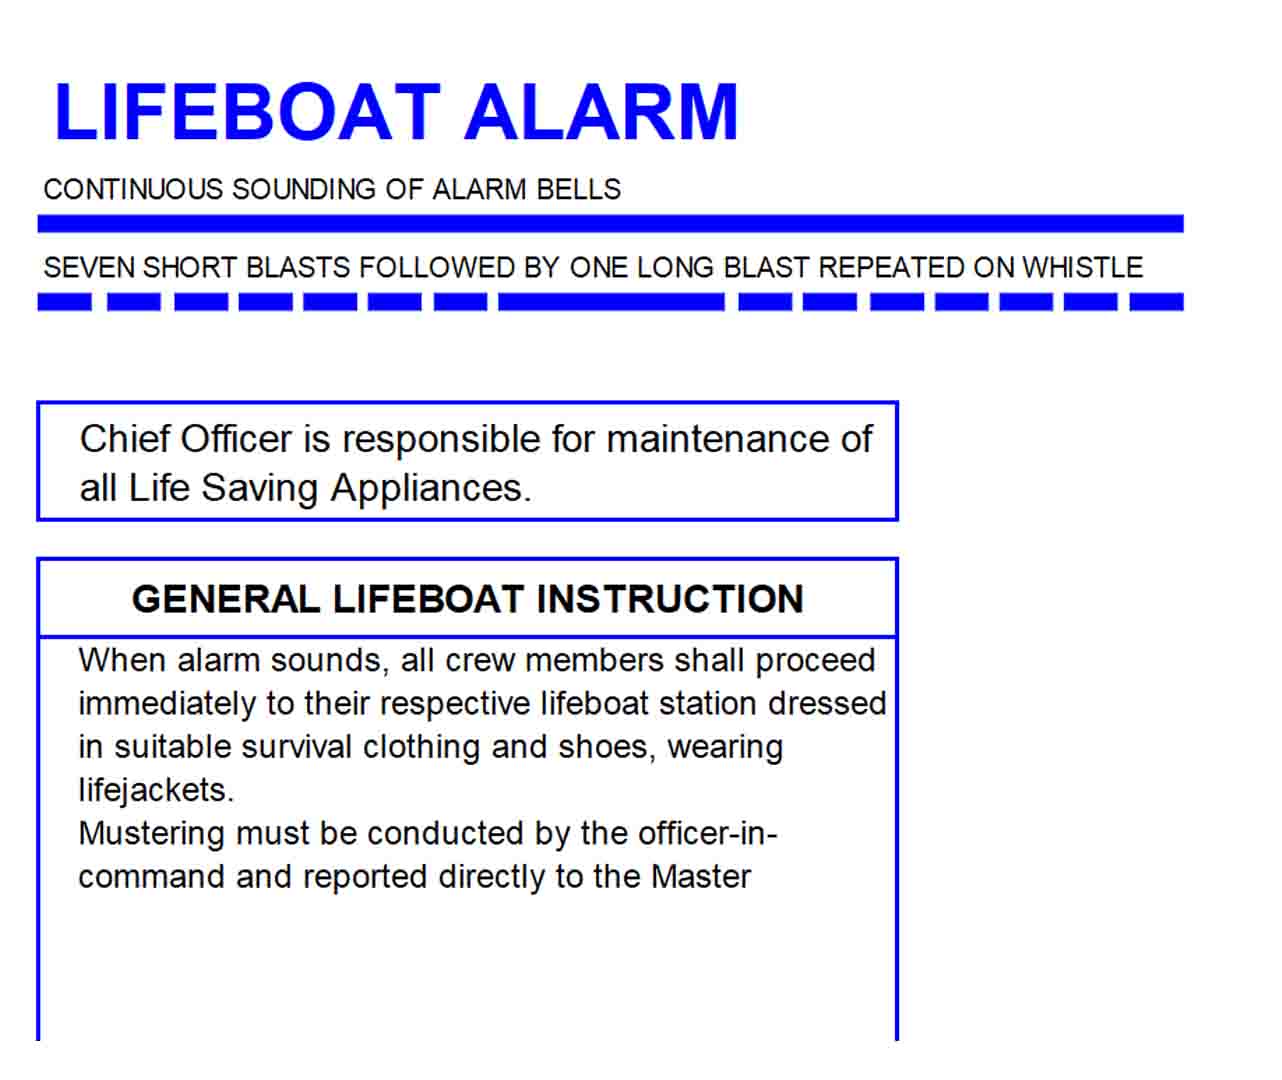 Lifeboat or abandon ship alarm consists of seven short blasts followed by one long blast on the ship's whistle together with the continuous sounding of the alarm bells.